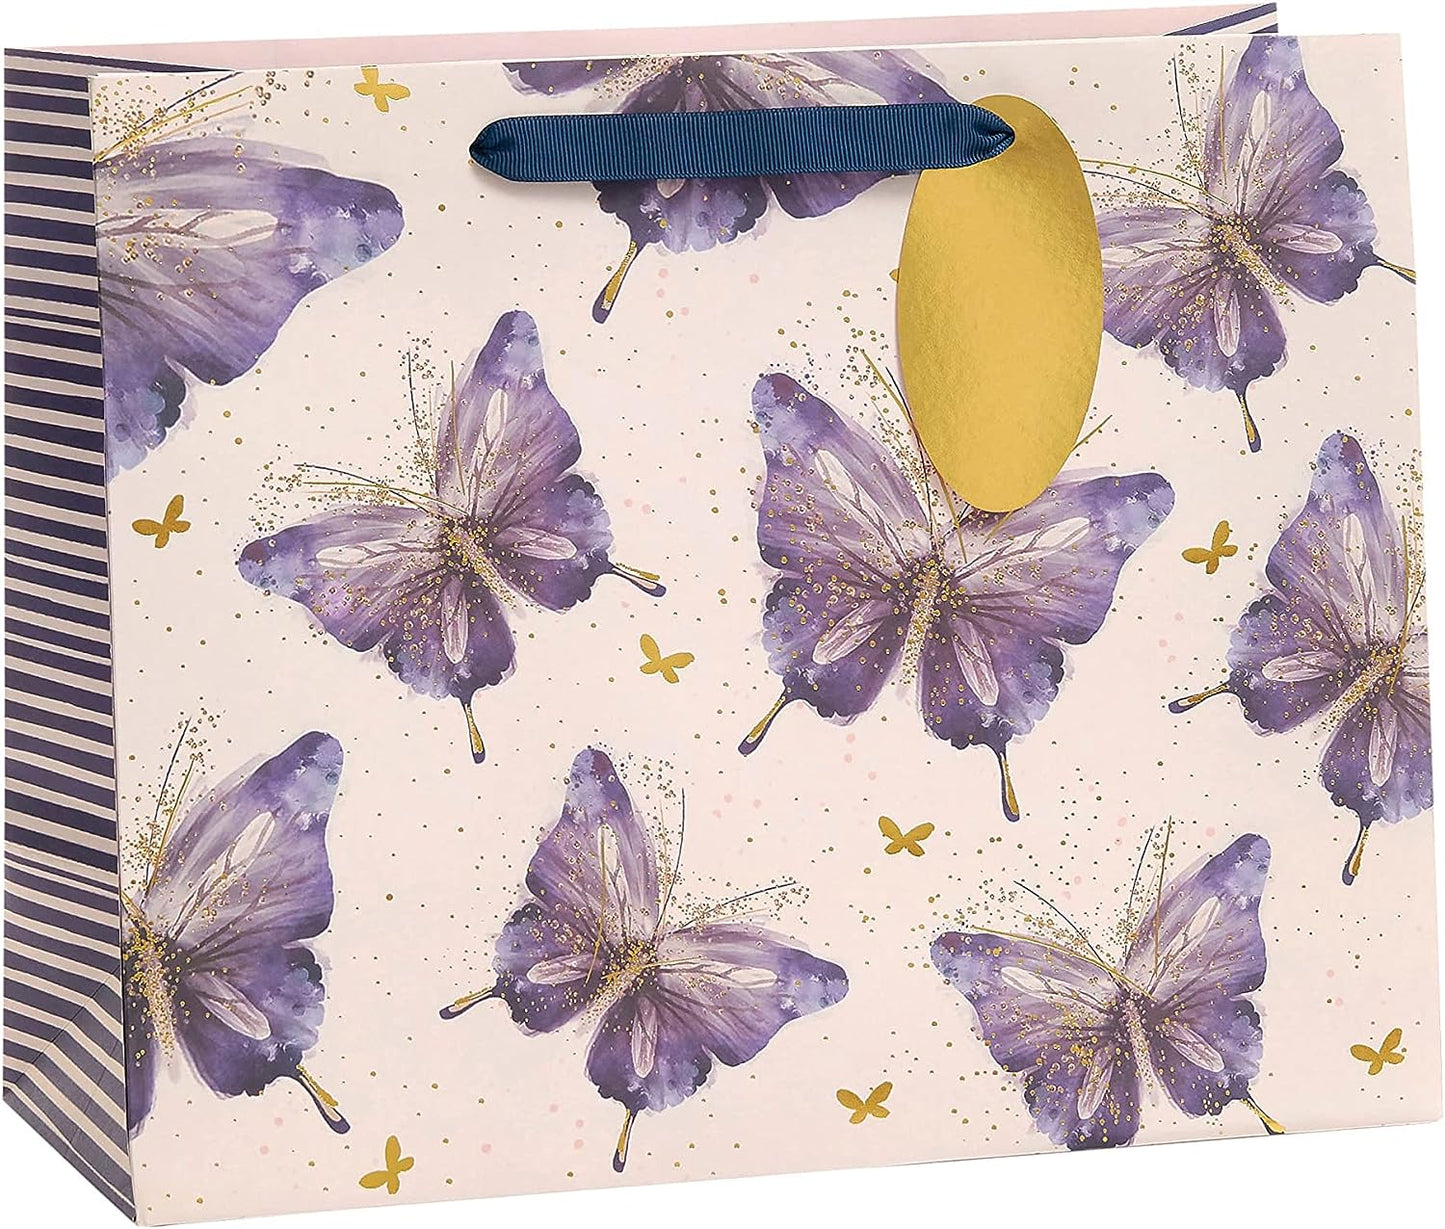 Butterfly Design Multipack Of 6 Large Gift Bags With Tags For Her, Any Occasion, Mother's Day, Birthday